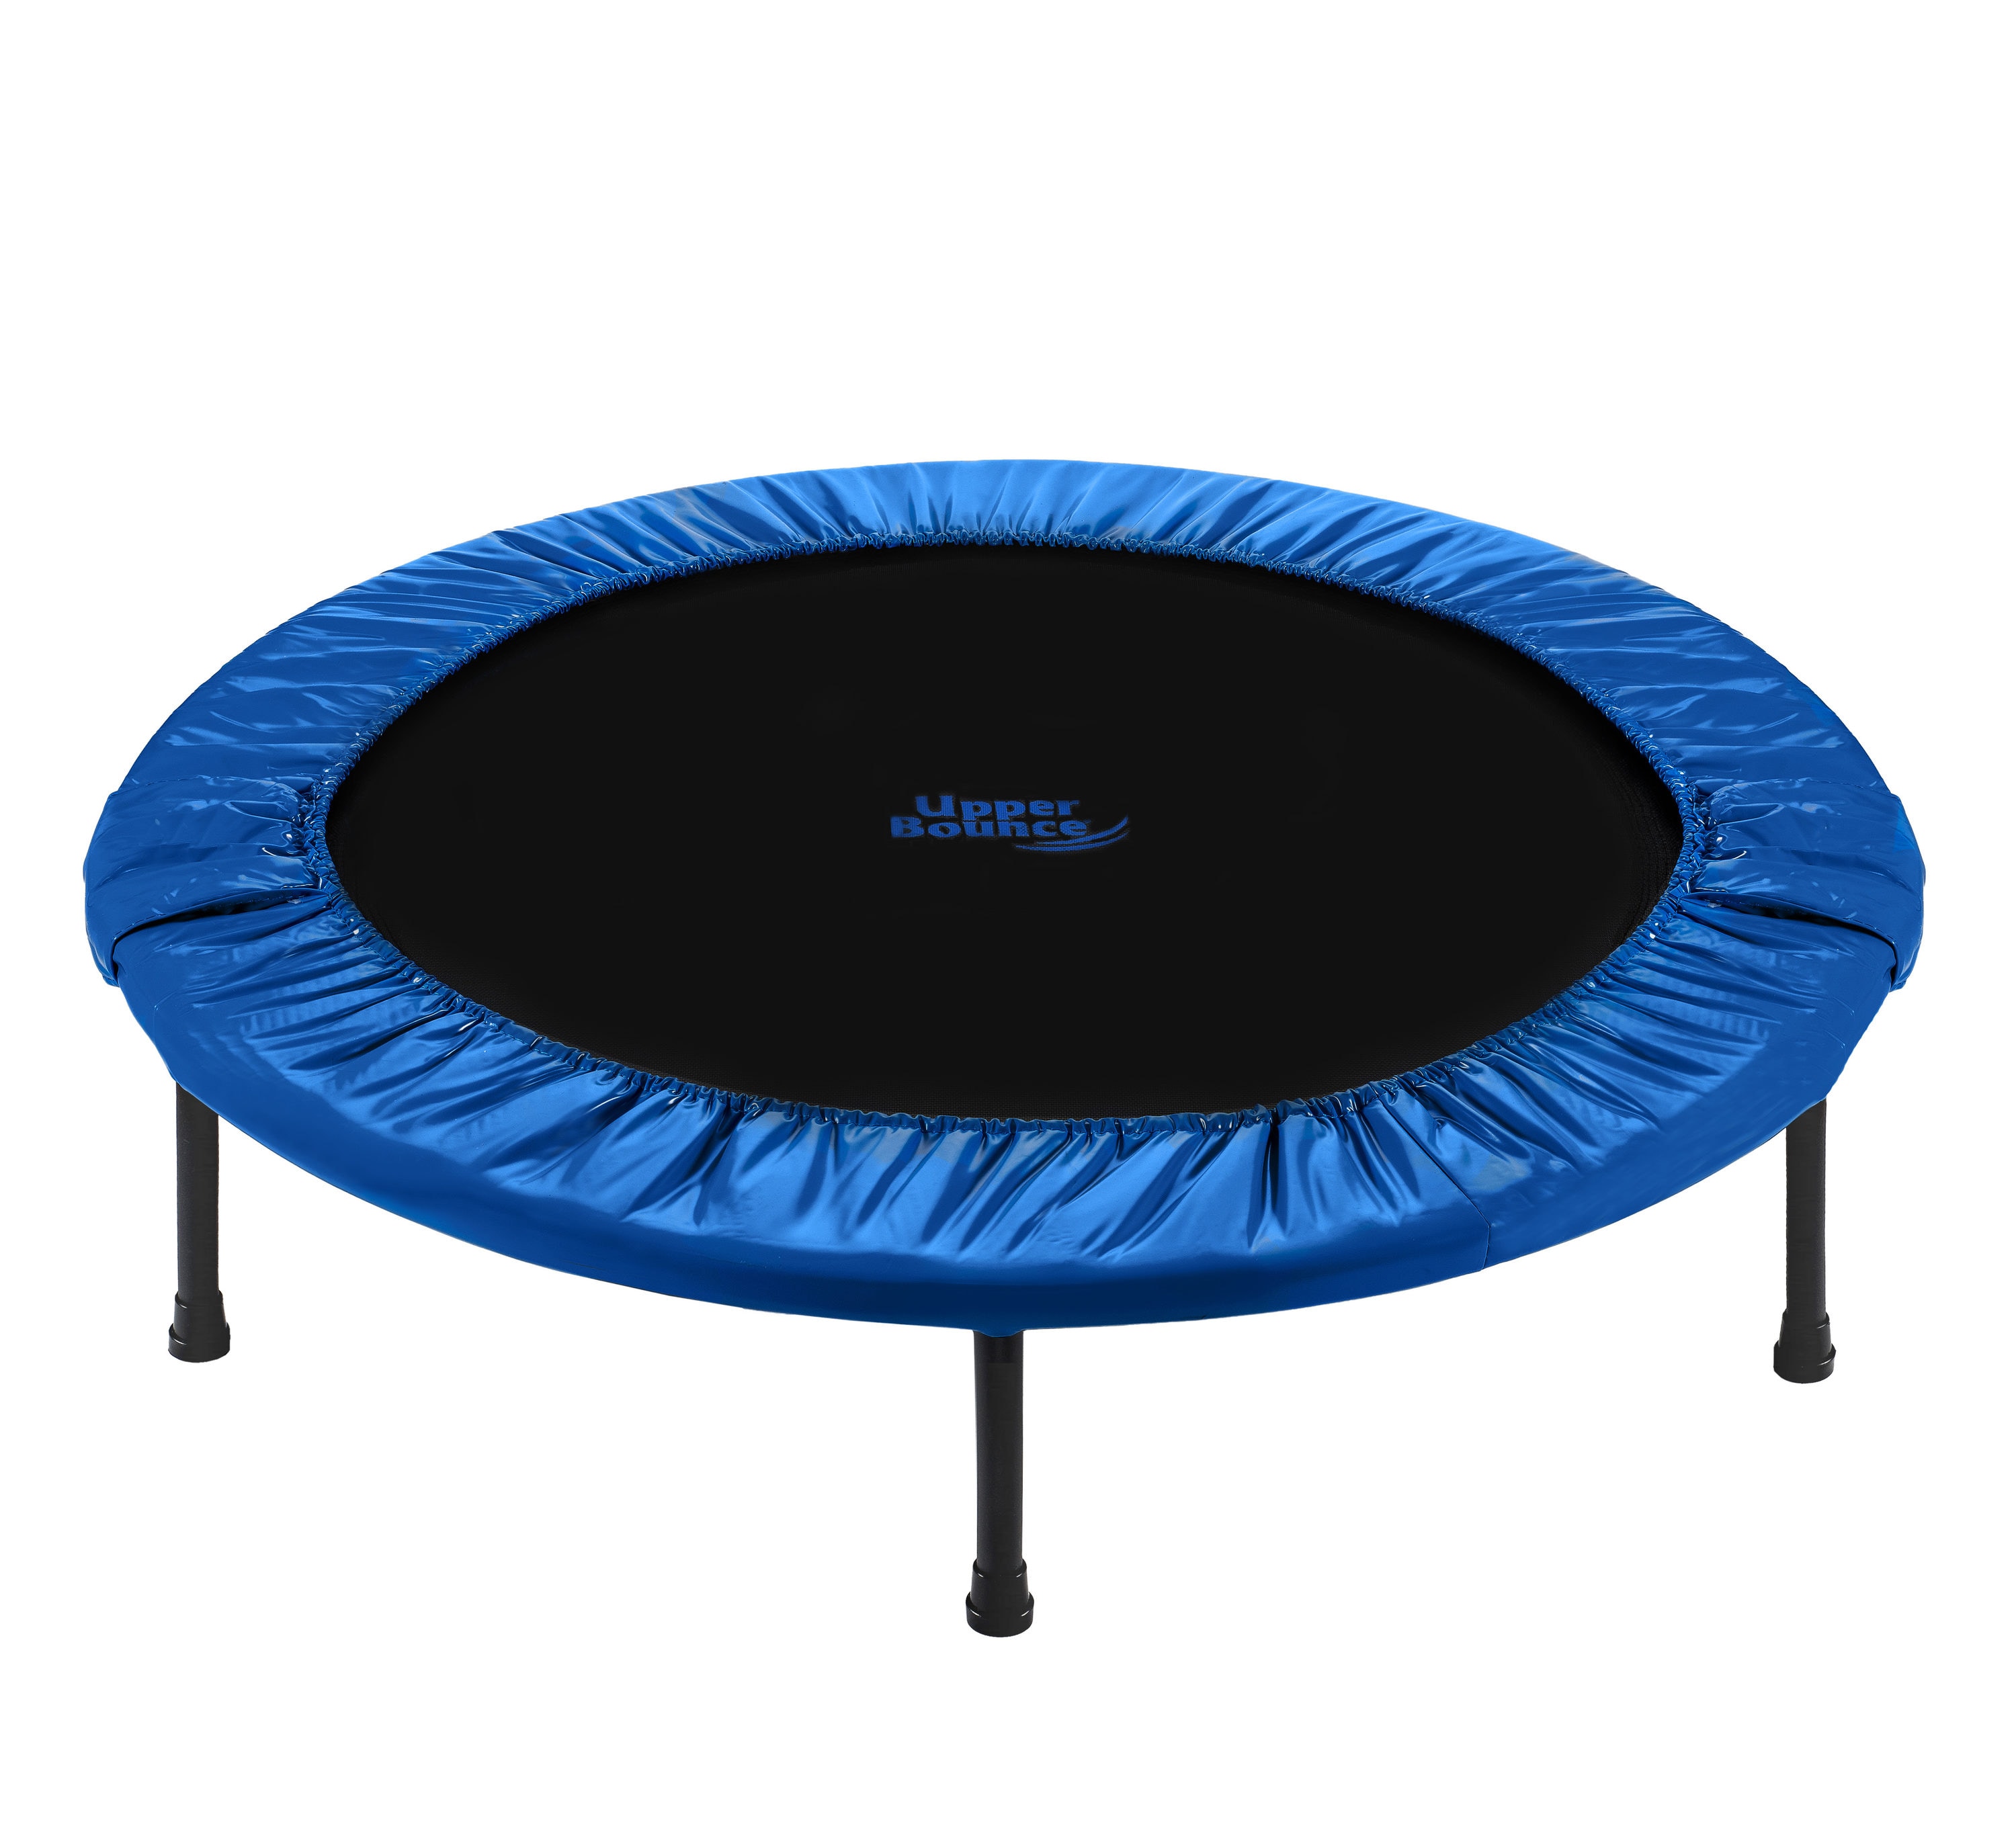 UpperBounce 3.33-ft Round Mini in Blue at Lowes.com